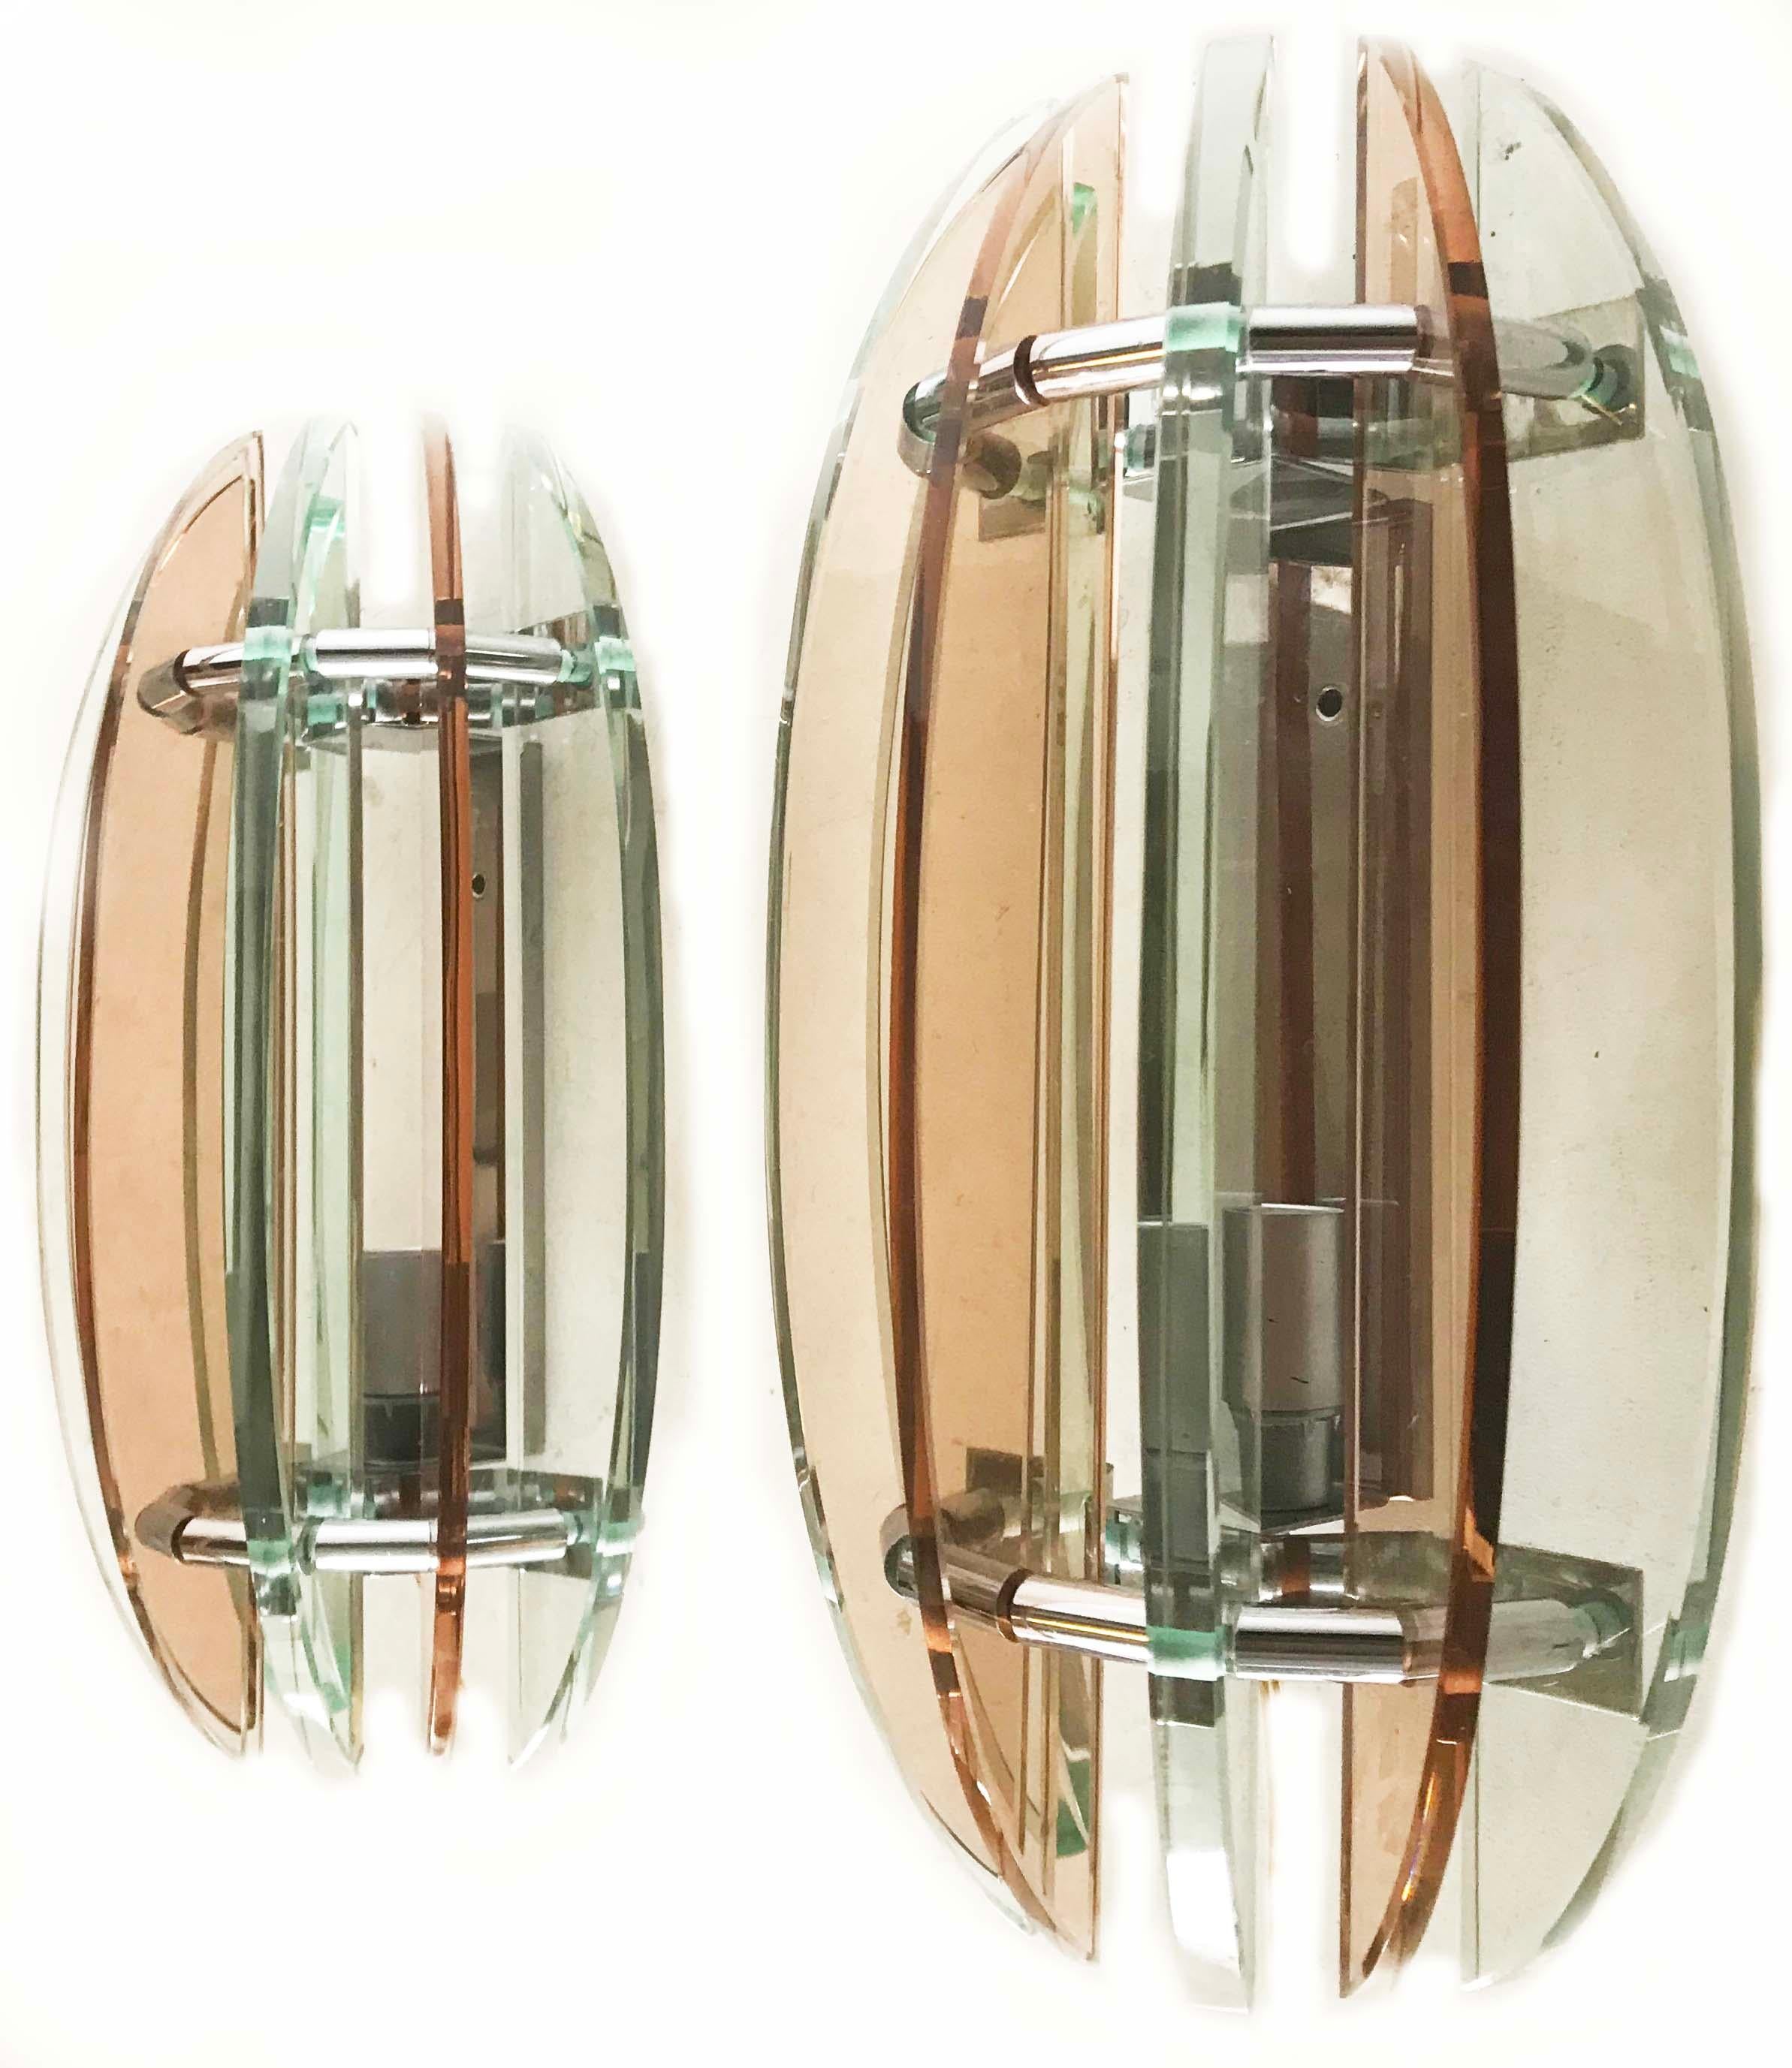 Superb pair of Veca Sconces, clear glass and pink made in Italy.
US rewired and in working condition.
60 watts max bulb.
Have a look at our impressive collection of French and Italian Mid Century Modern Period Sconces.
More than 300 pairs.